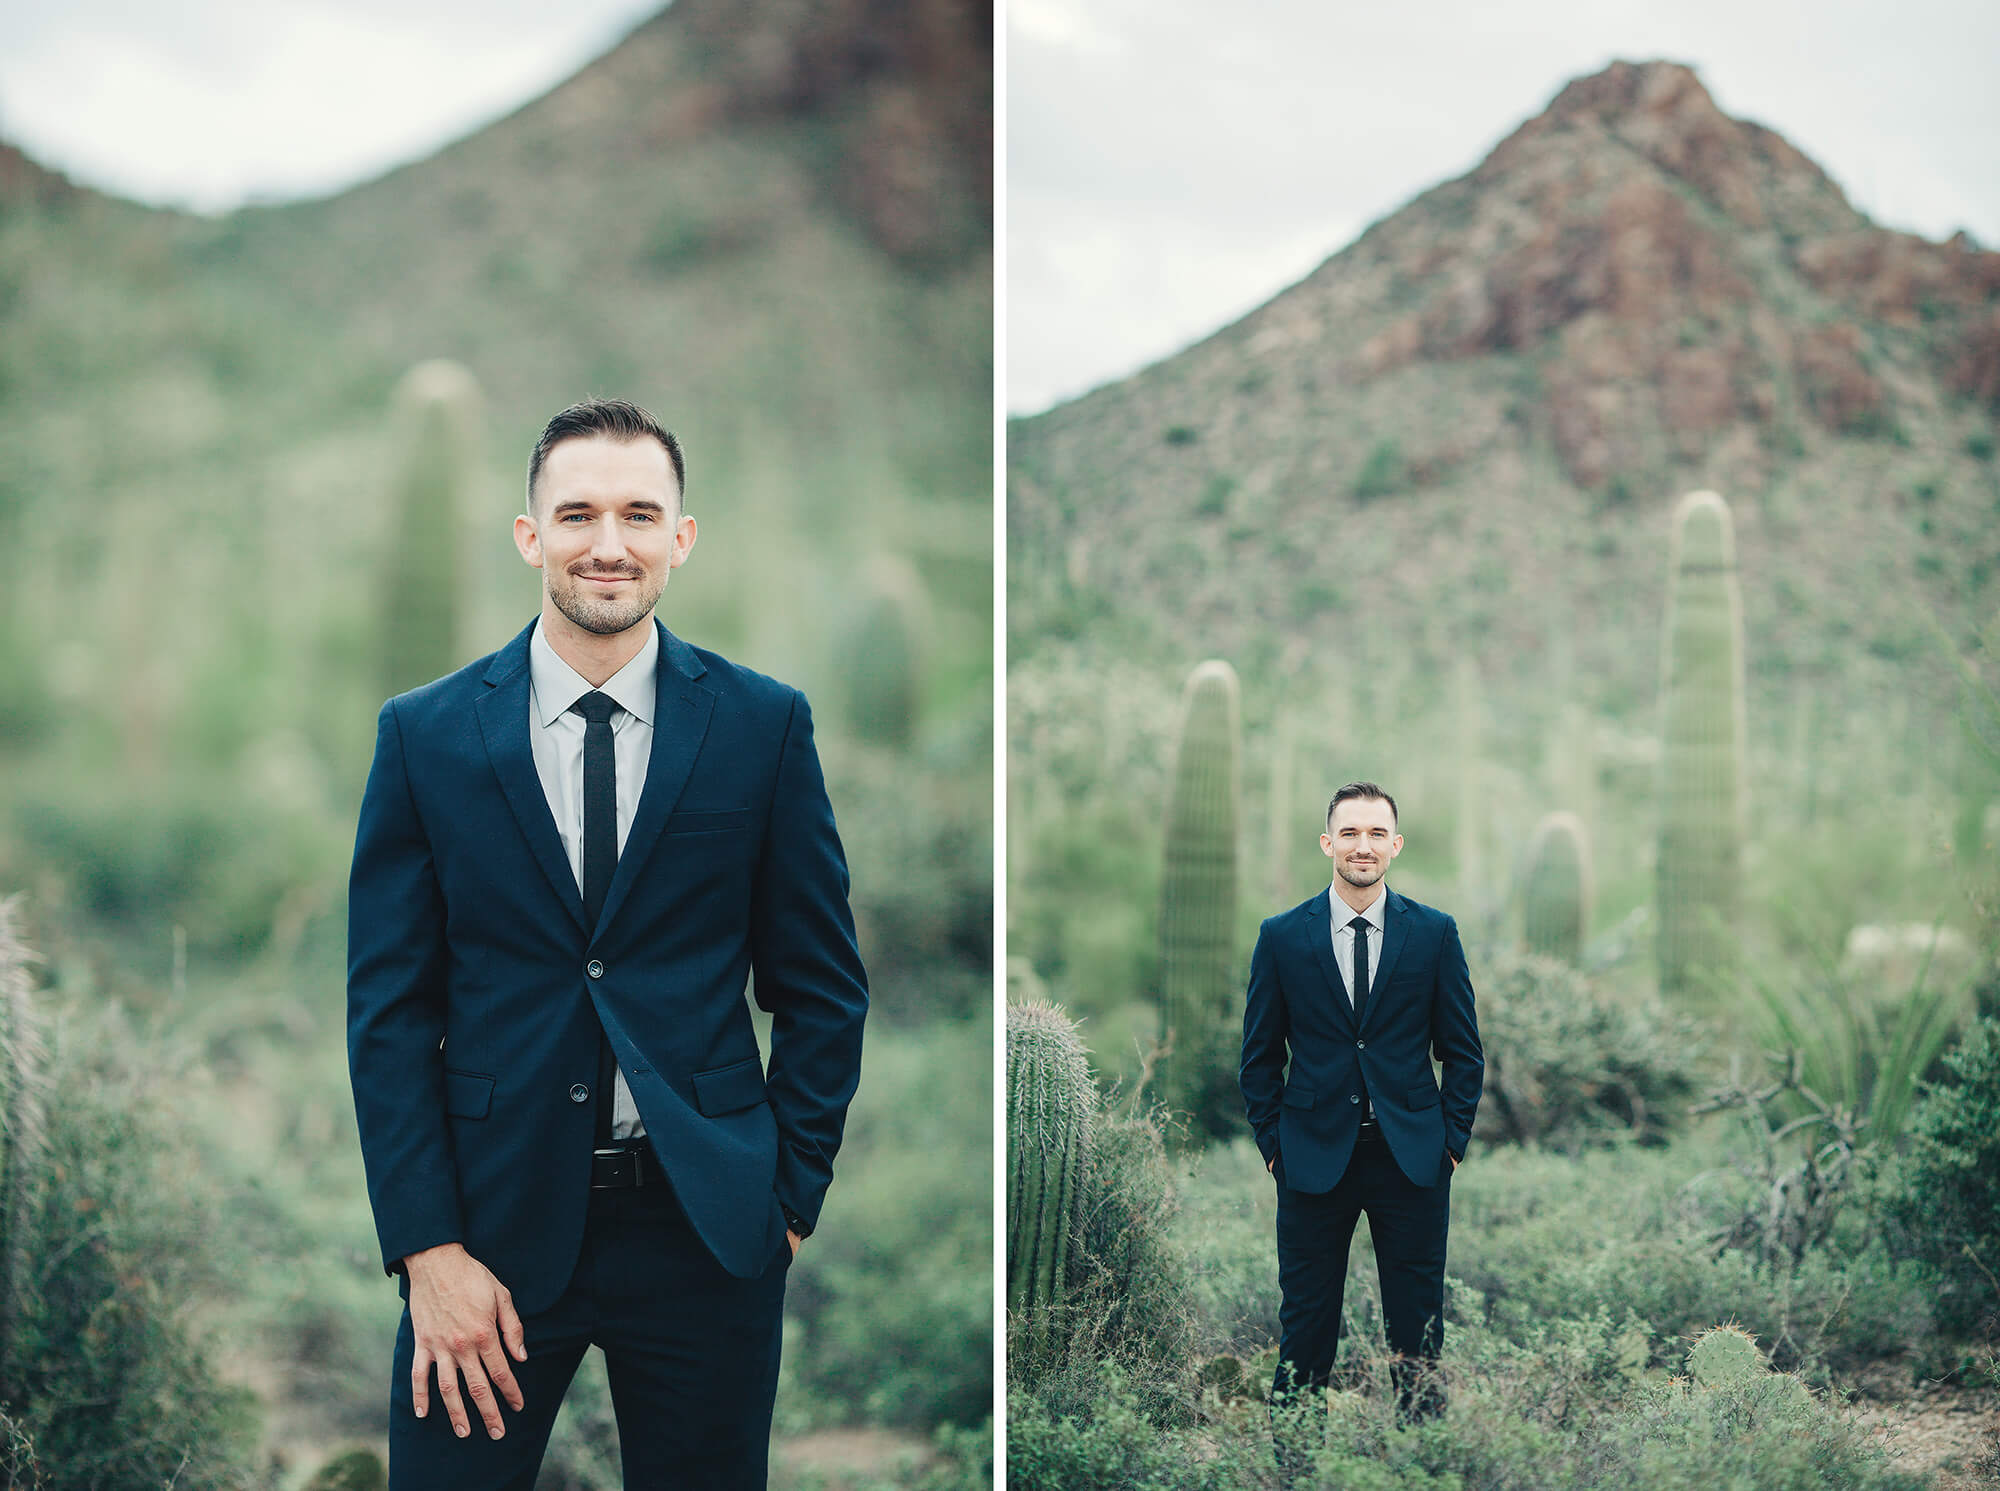 Kenneth looking handsome in his wedding attire following his desert elopement with bride, Amanda.